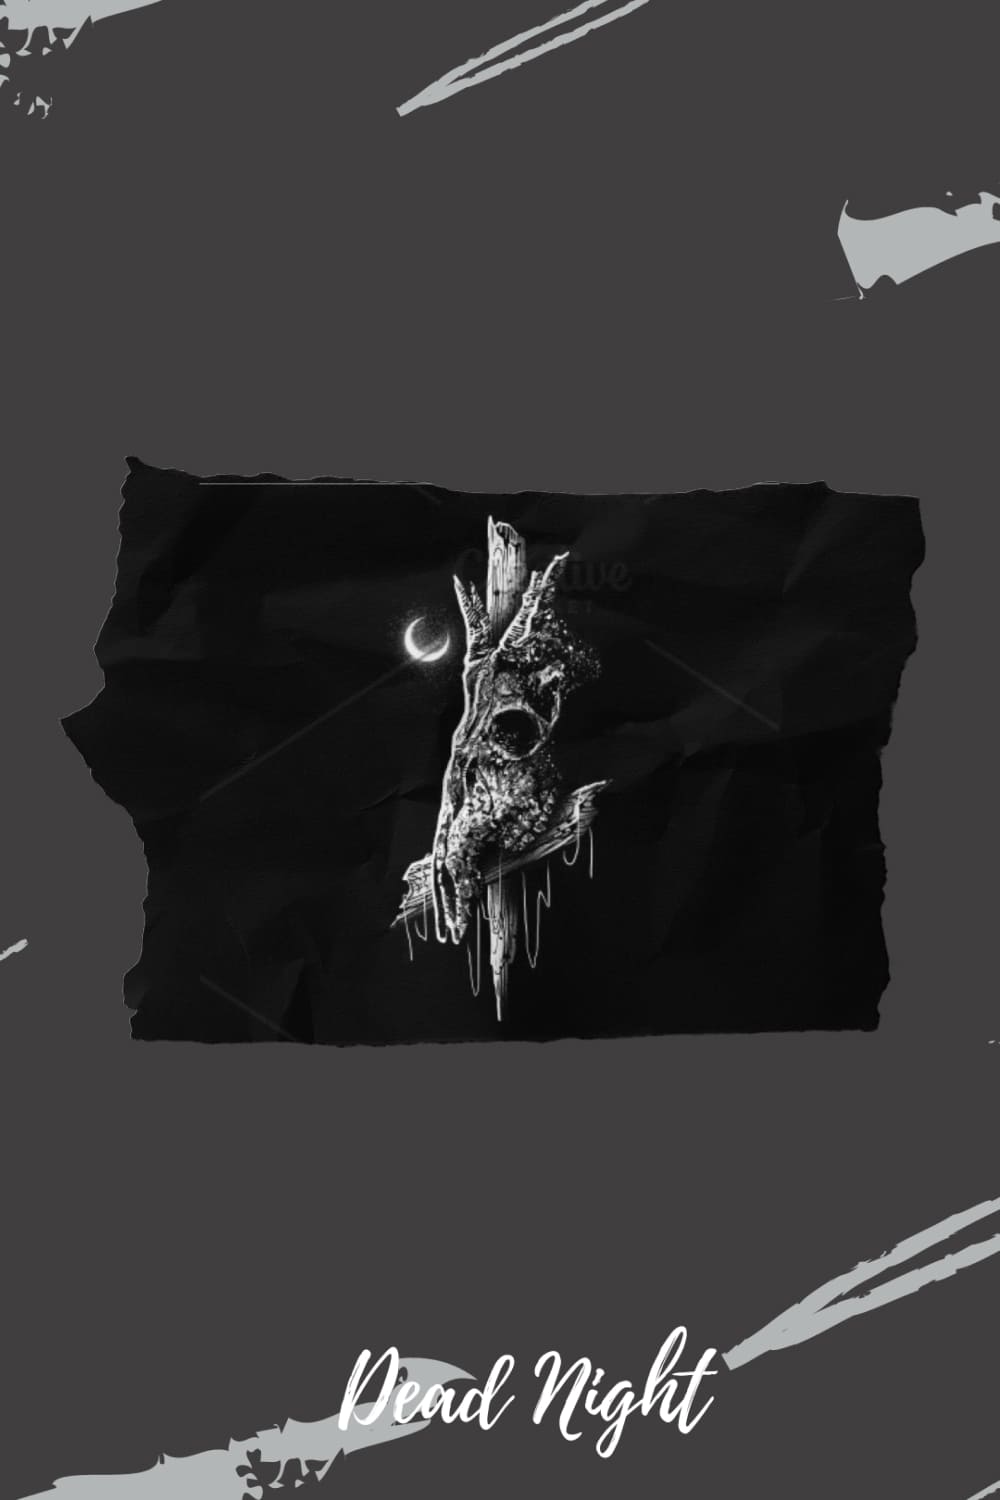 Dead night with a goat skull on a black background of a gray pattern.